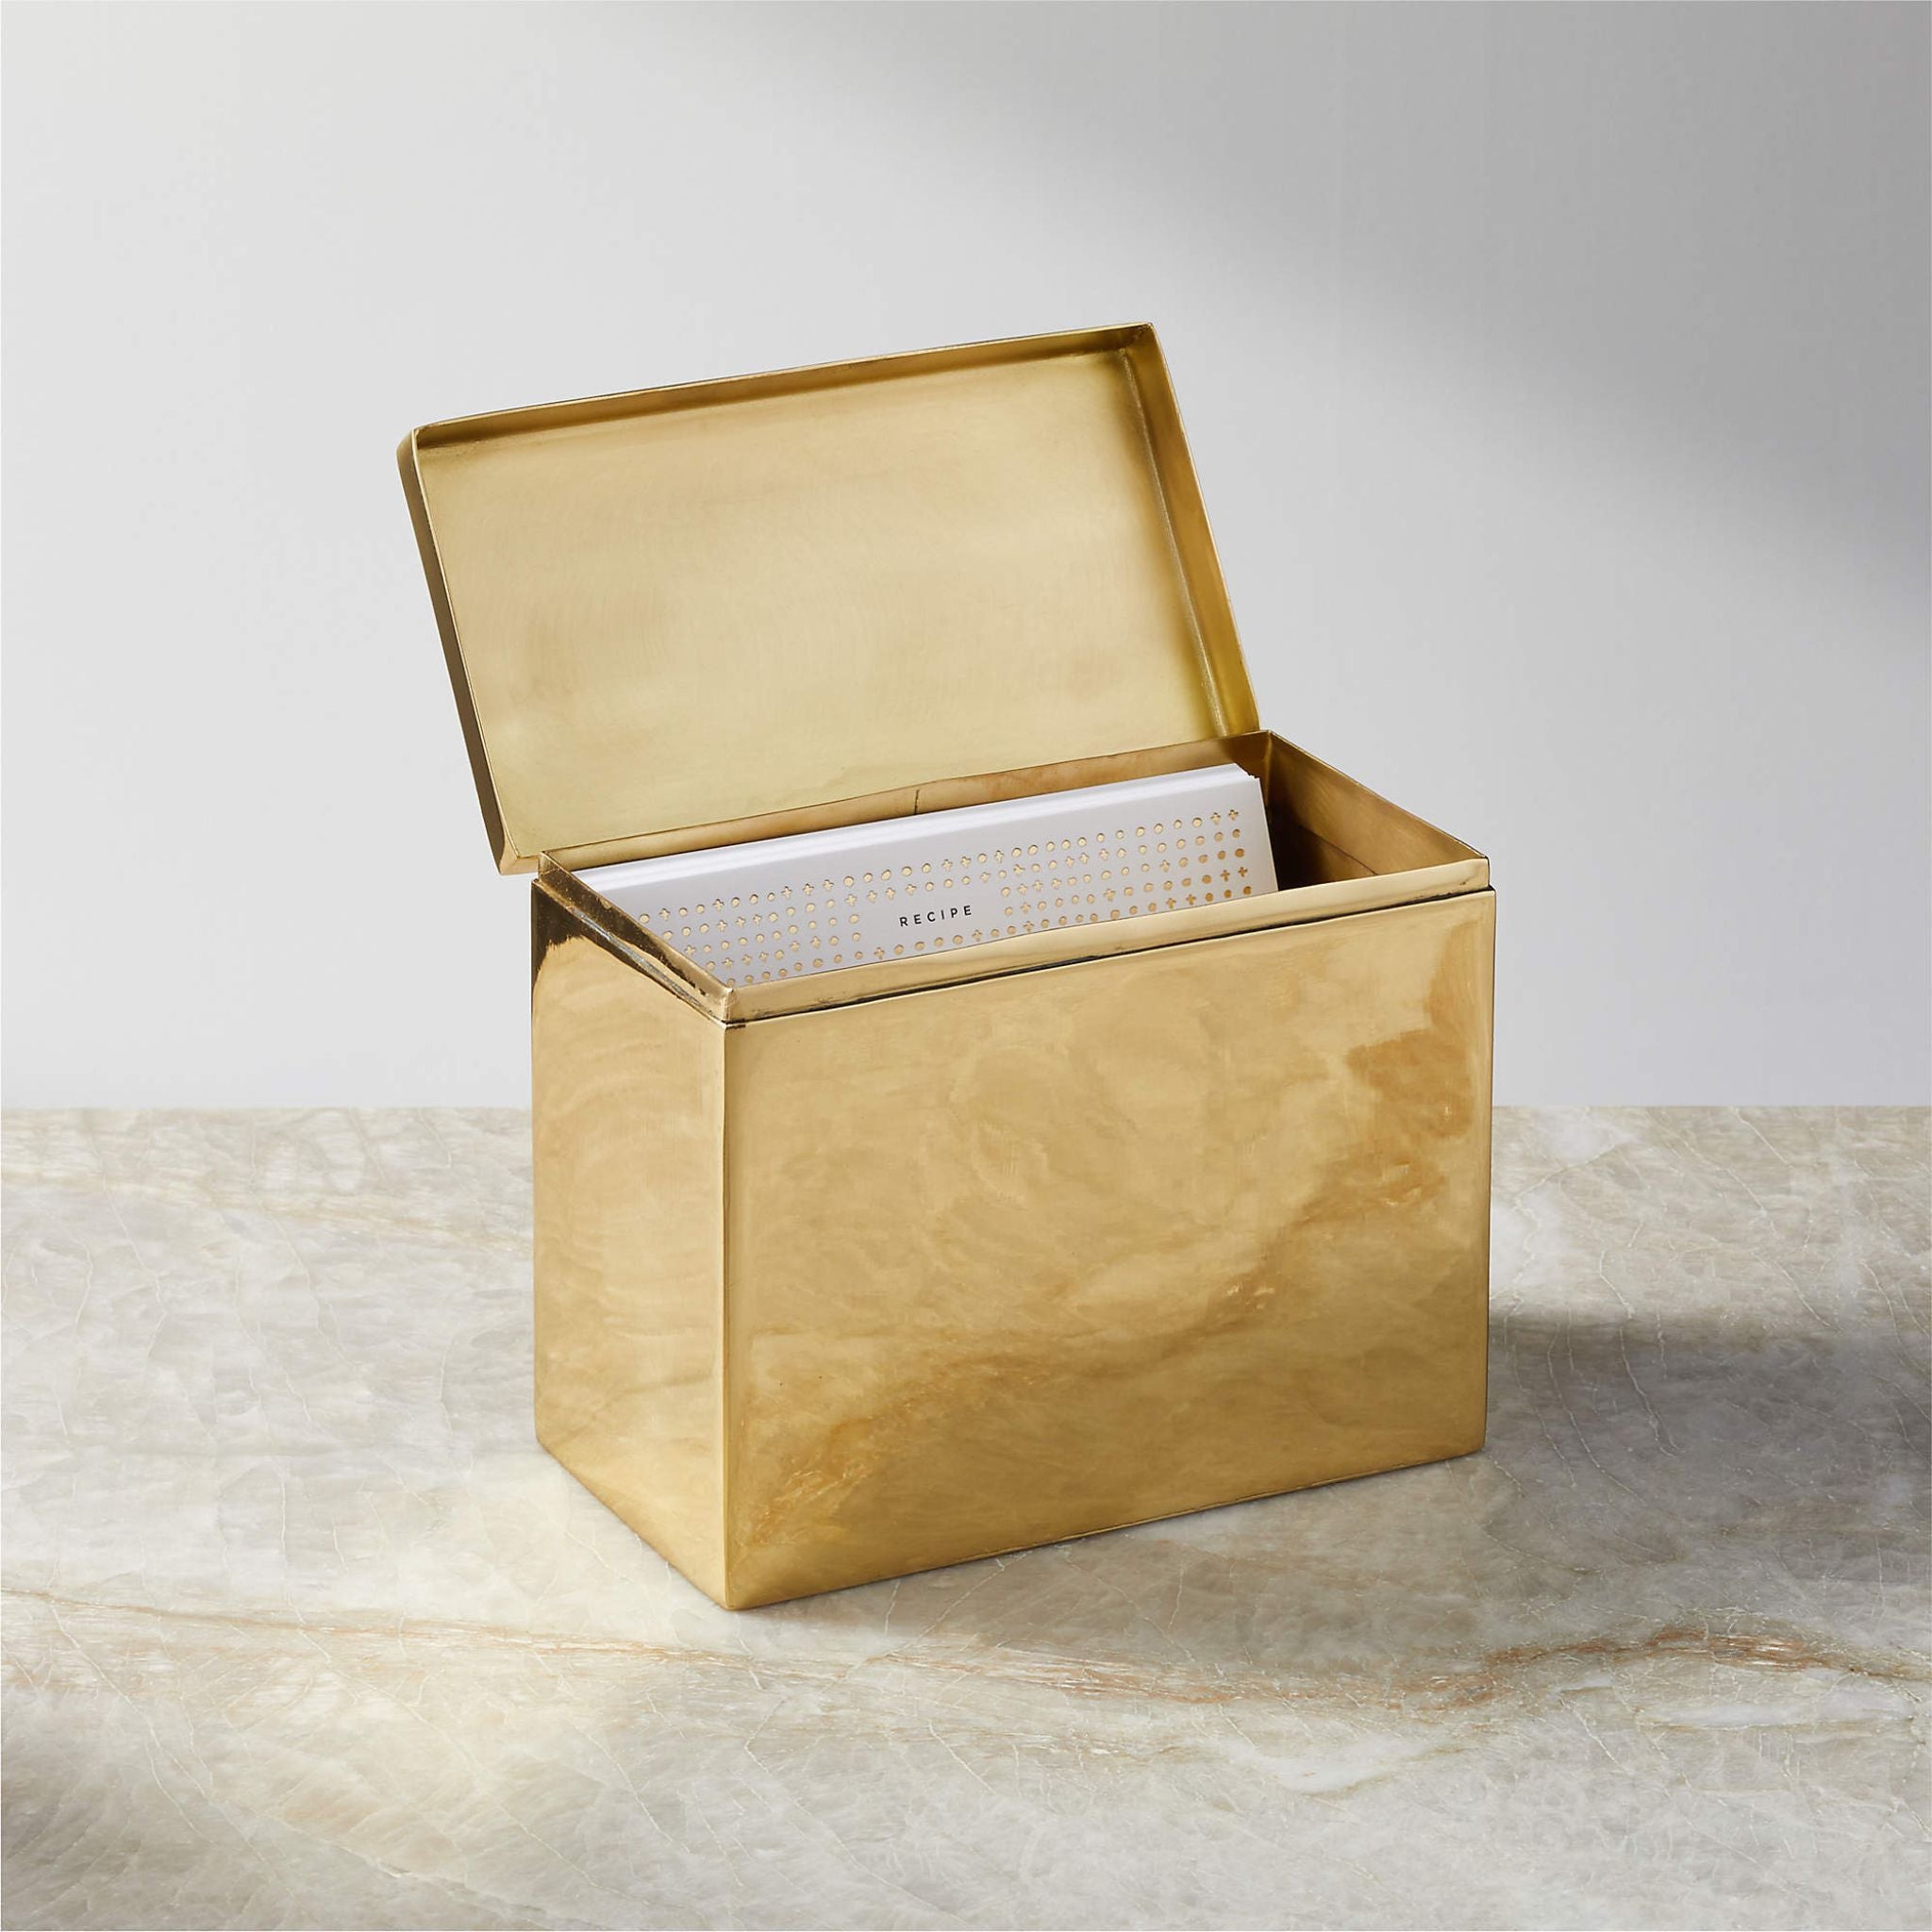 Simply Elevated - This heirloom-quality recipe box will keep the secret ingredient to grandma's vichyssoise safe and sound (vermouth!). Available in either mirror-like solid brass or silver-plated brass, each has a hinged lid featuring beautifully etched lettering to denote its purpose. 